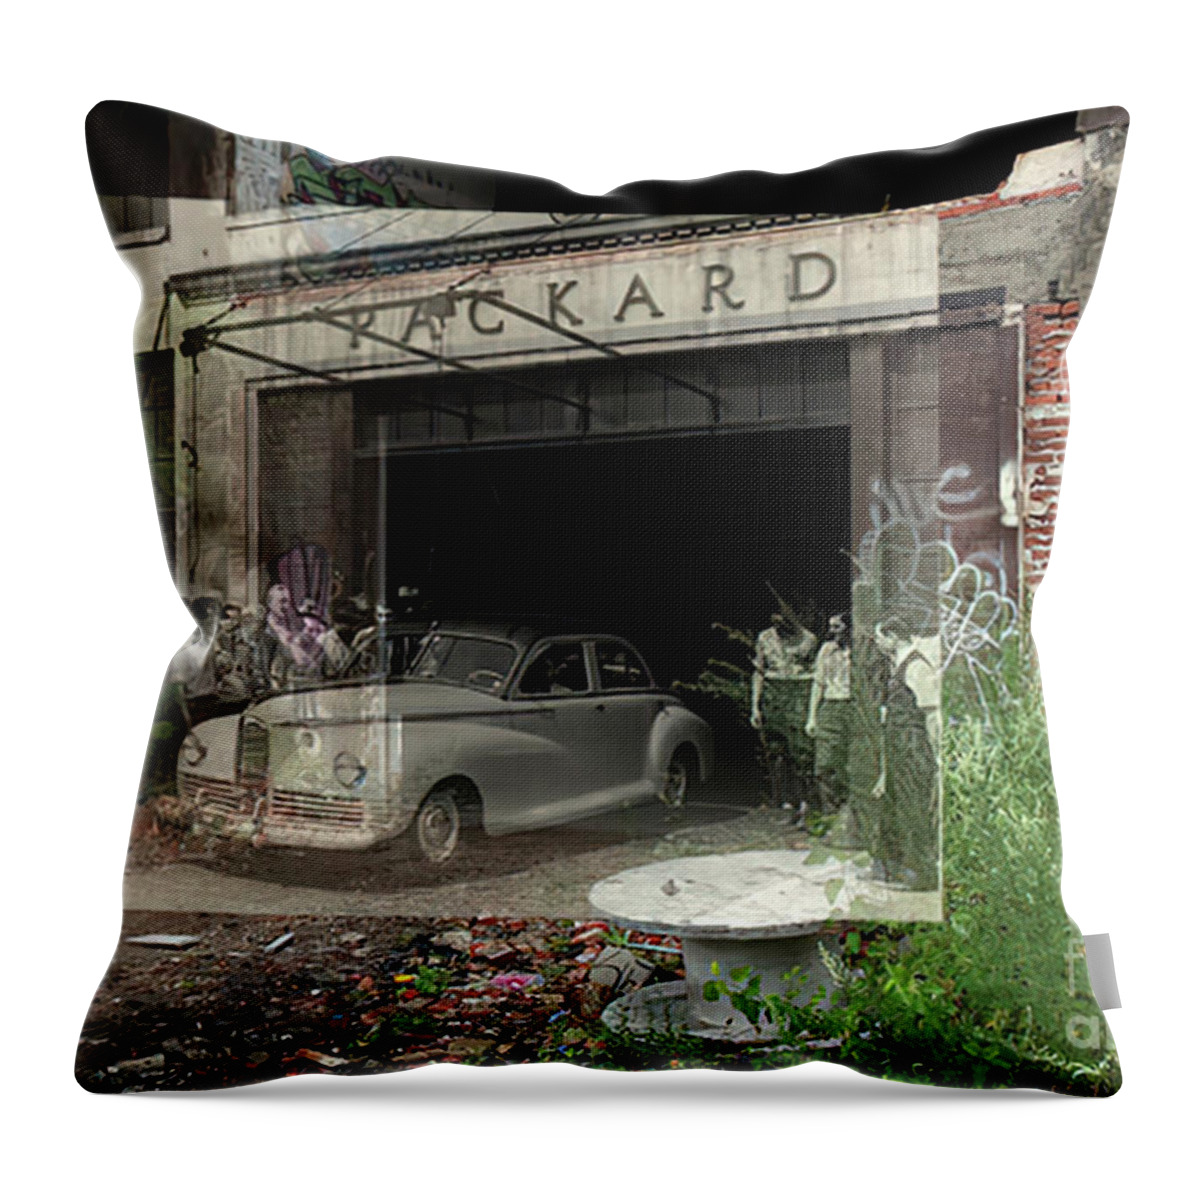 Vintage Throw Pillow featuring the photograph Overlay Image Of 1941 Packard Clipper Then And Now by Retrographs